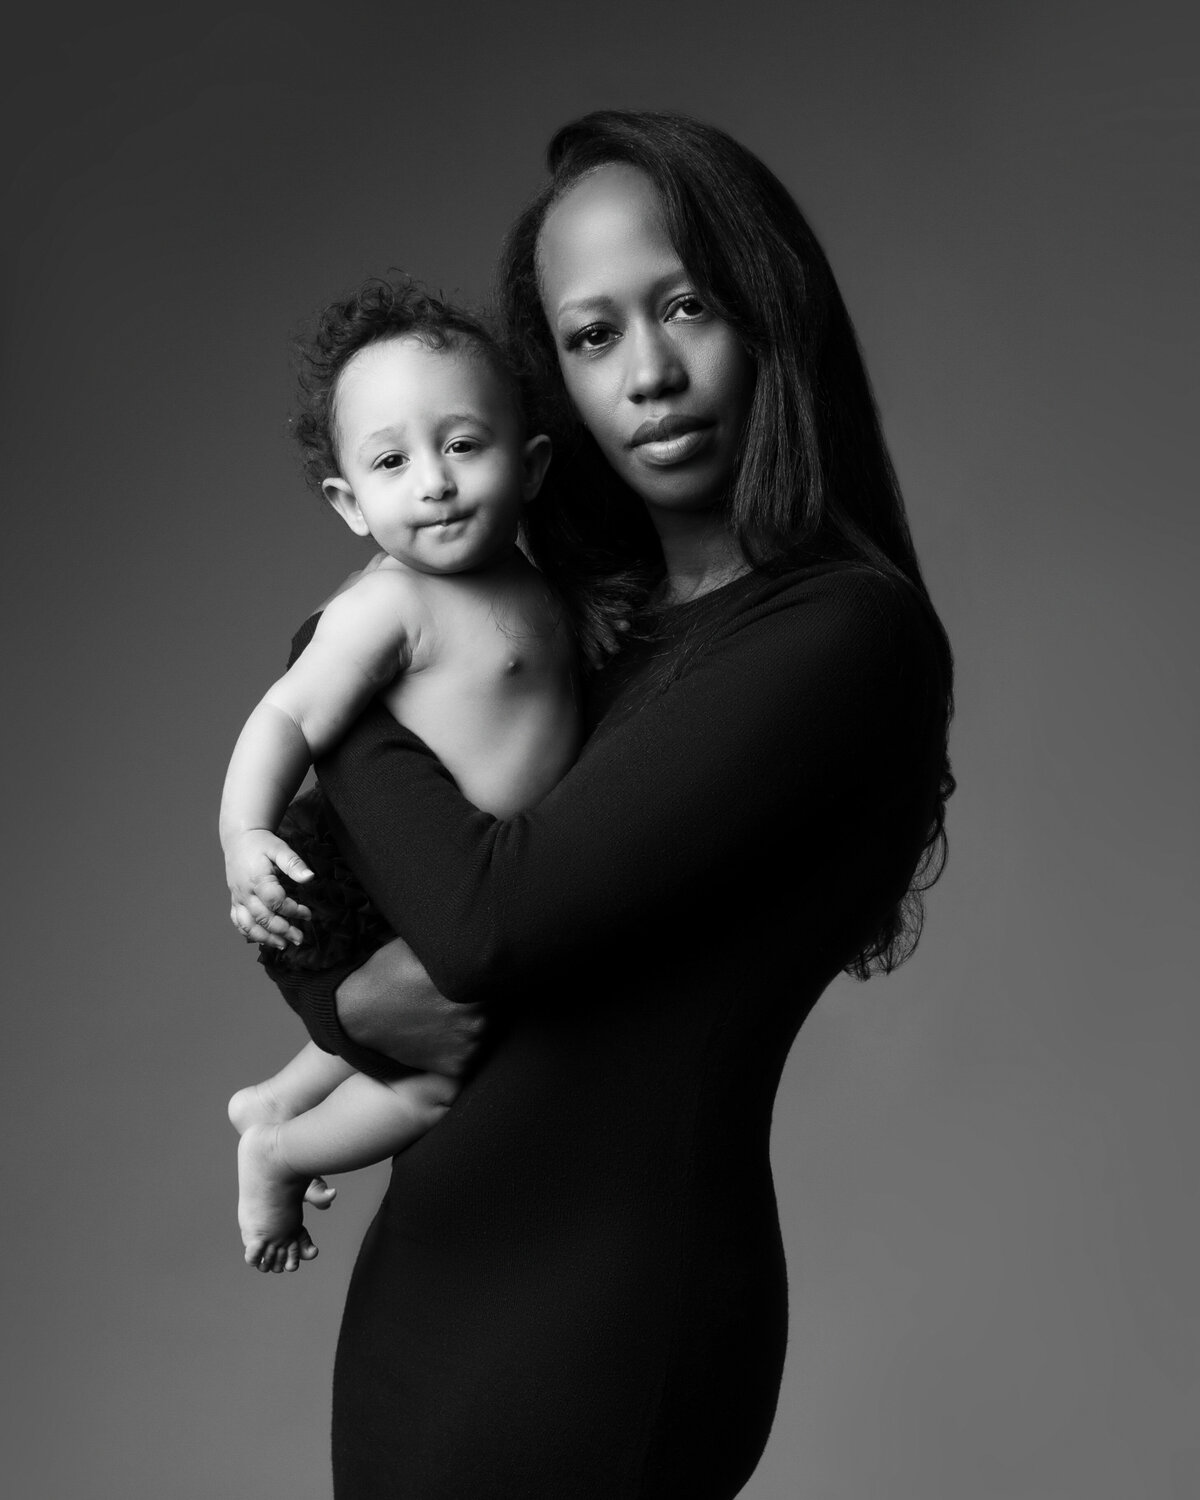 Timeless black and white family portrait by Daisy Rey in New Jersey photo studio